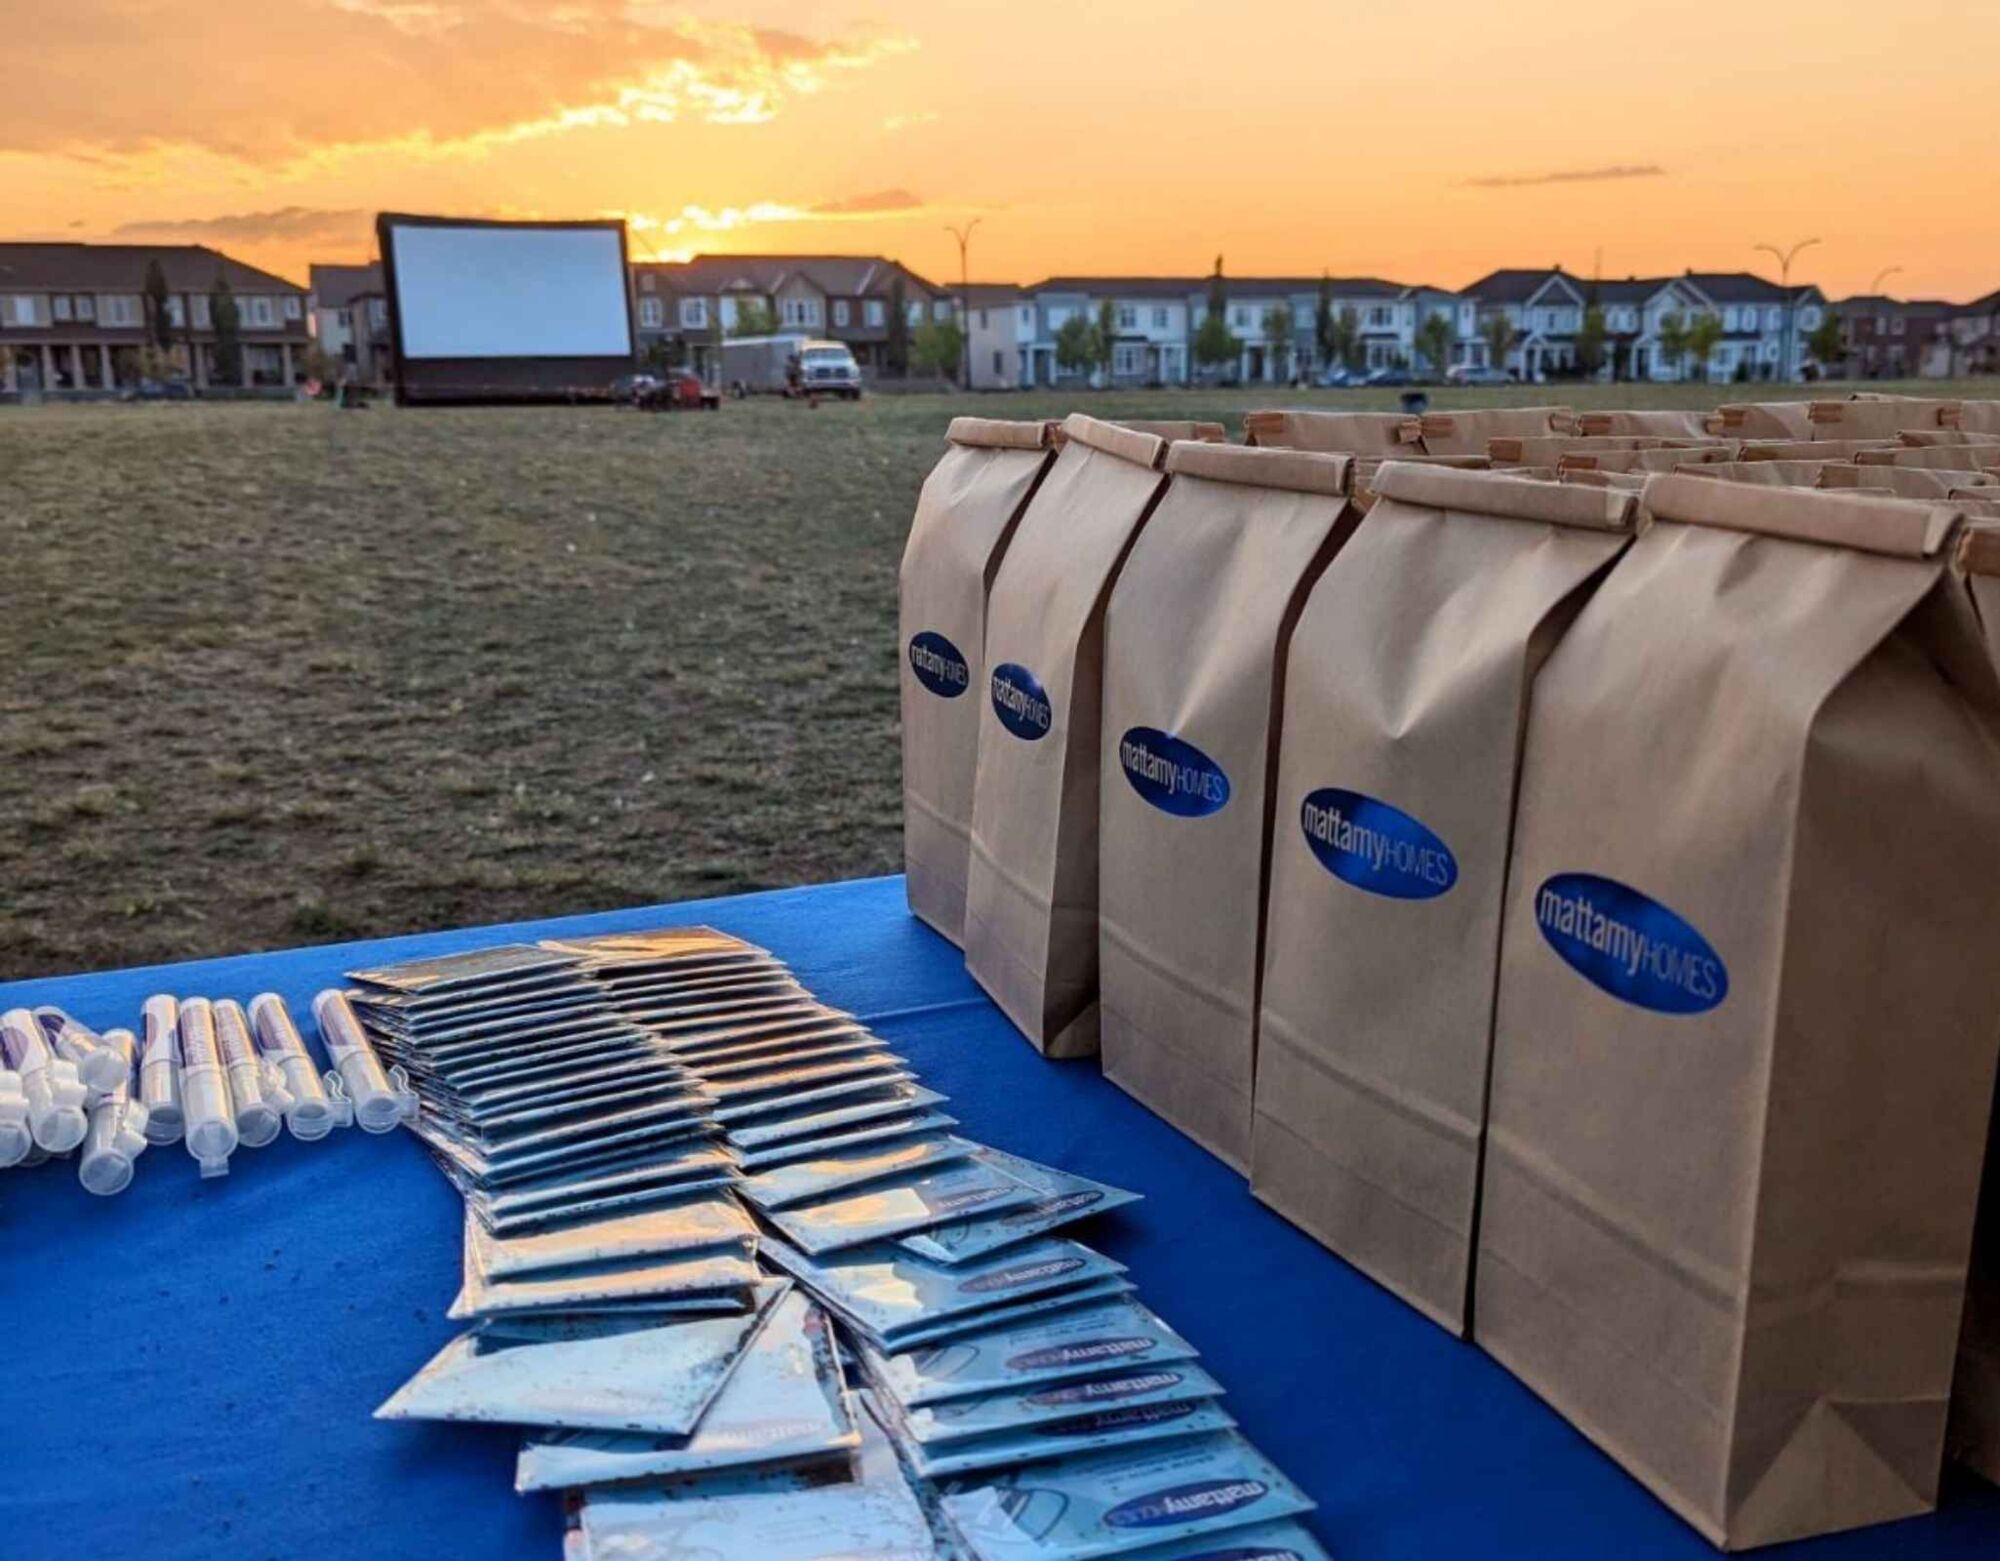 Event table with paper bags in a park, movie screen in background